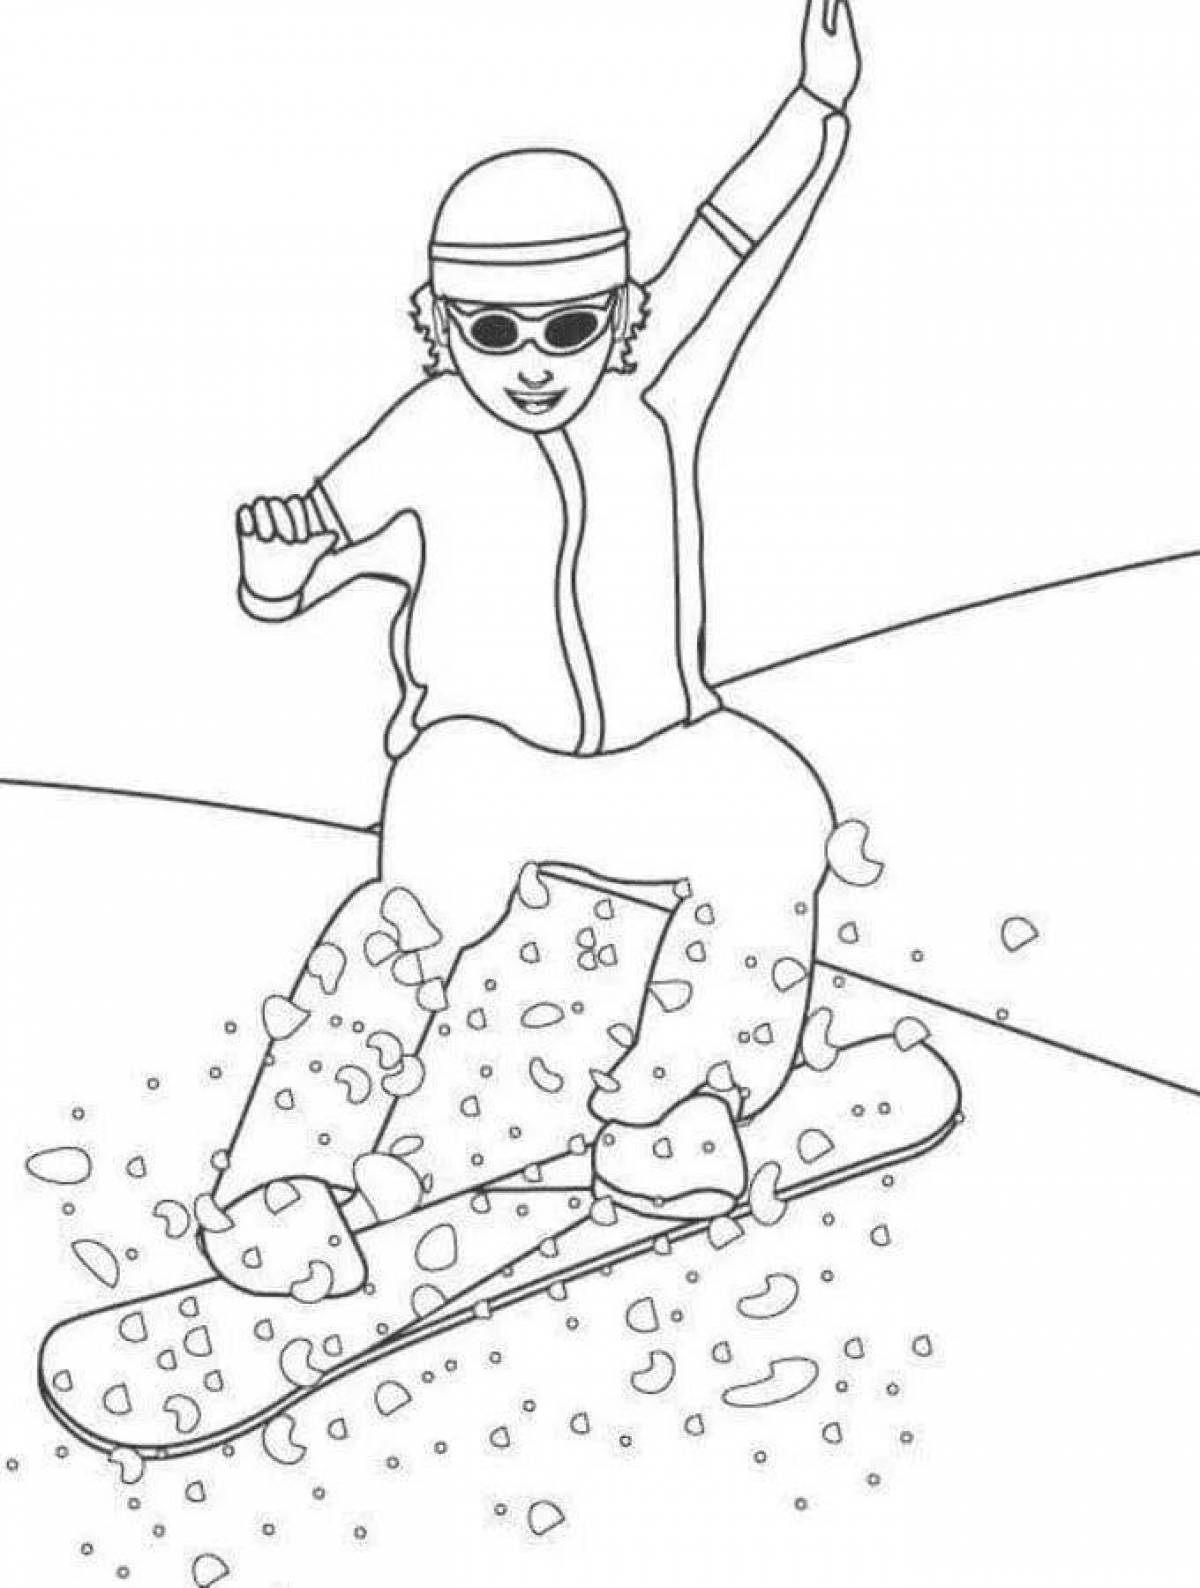 Coloring page funny snowboard